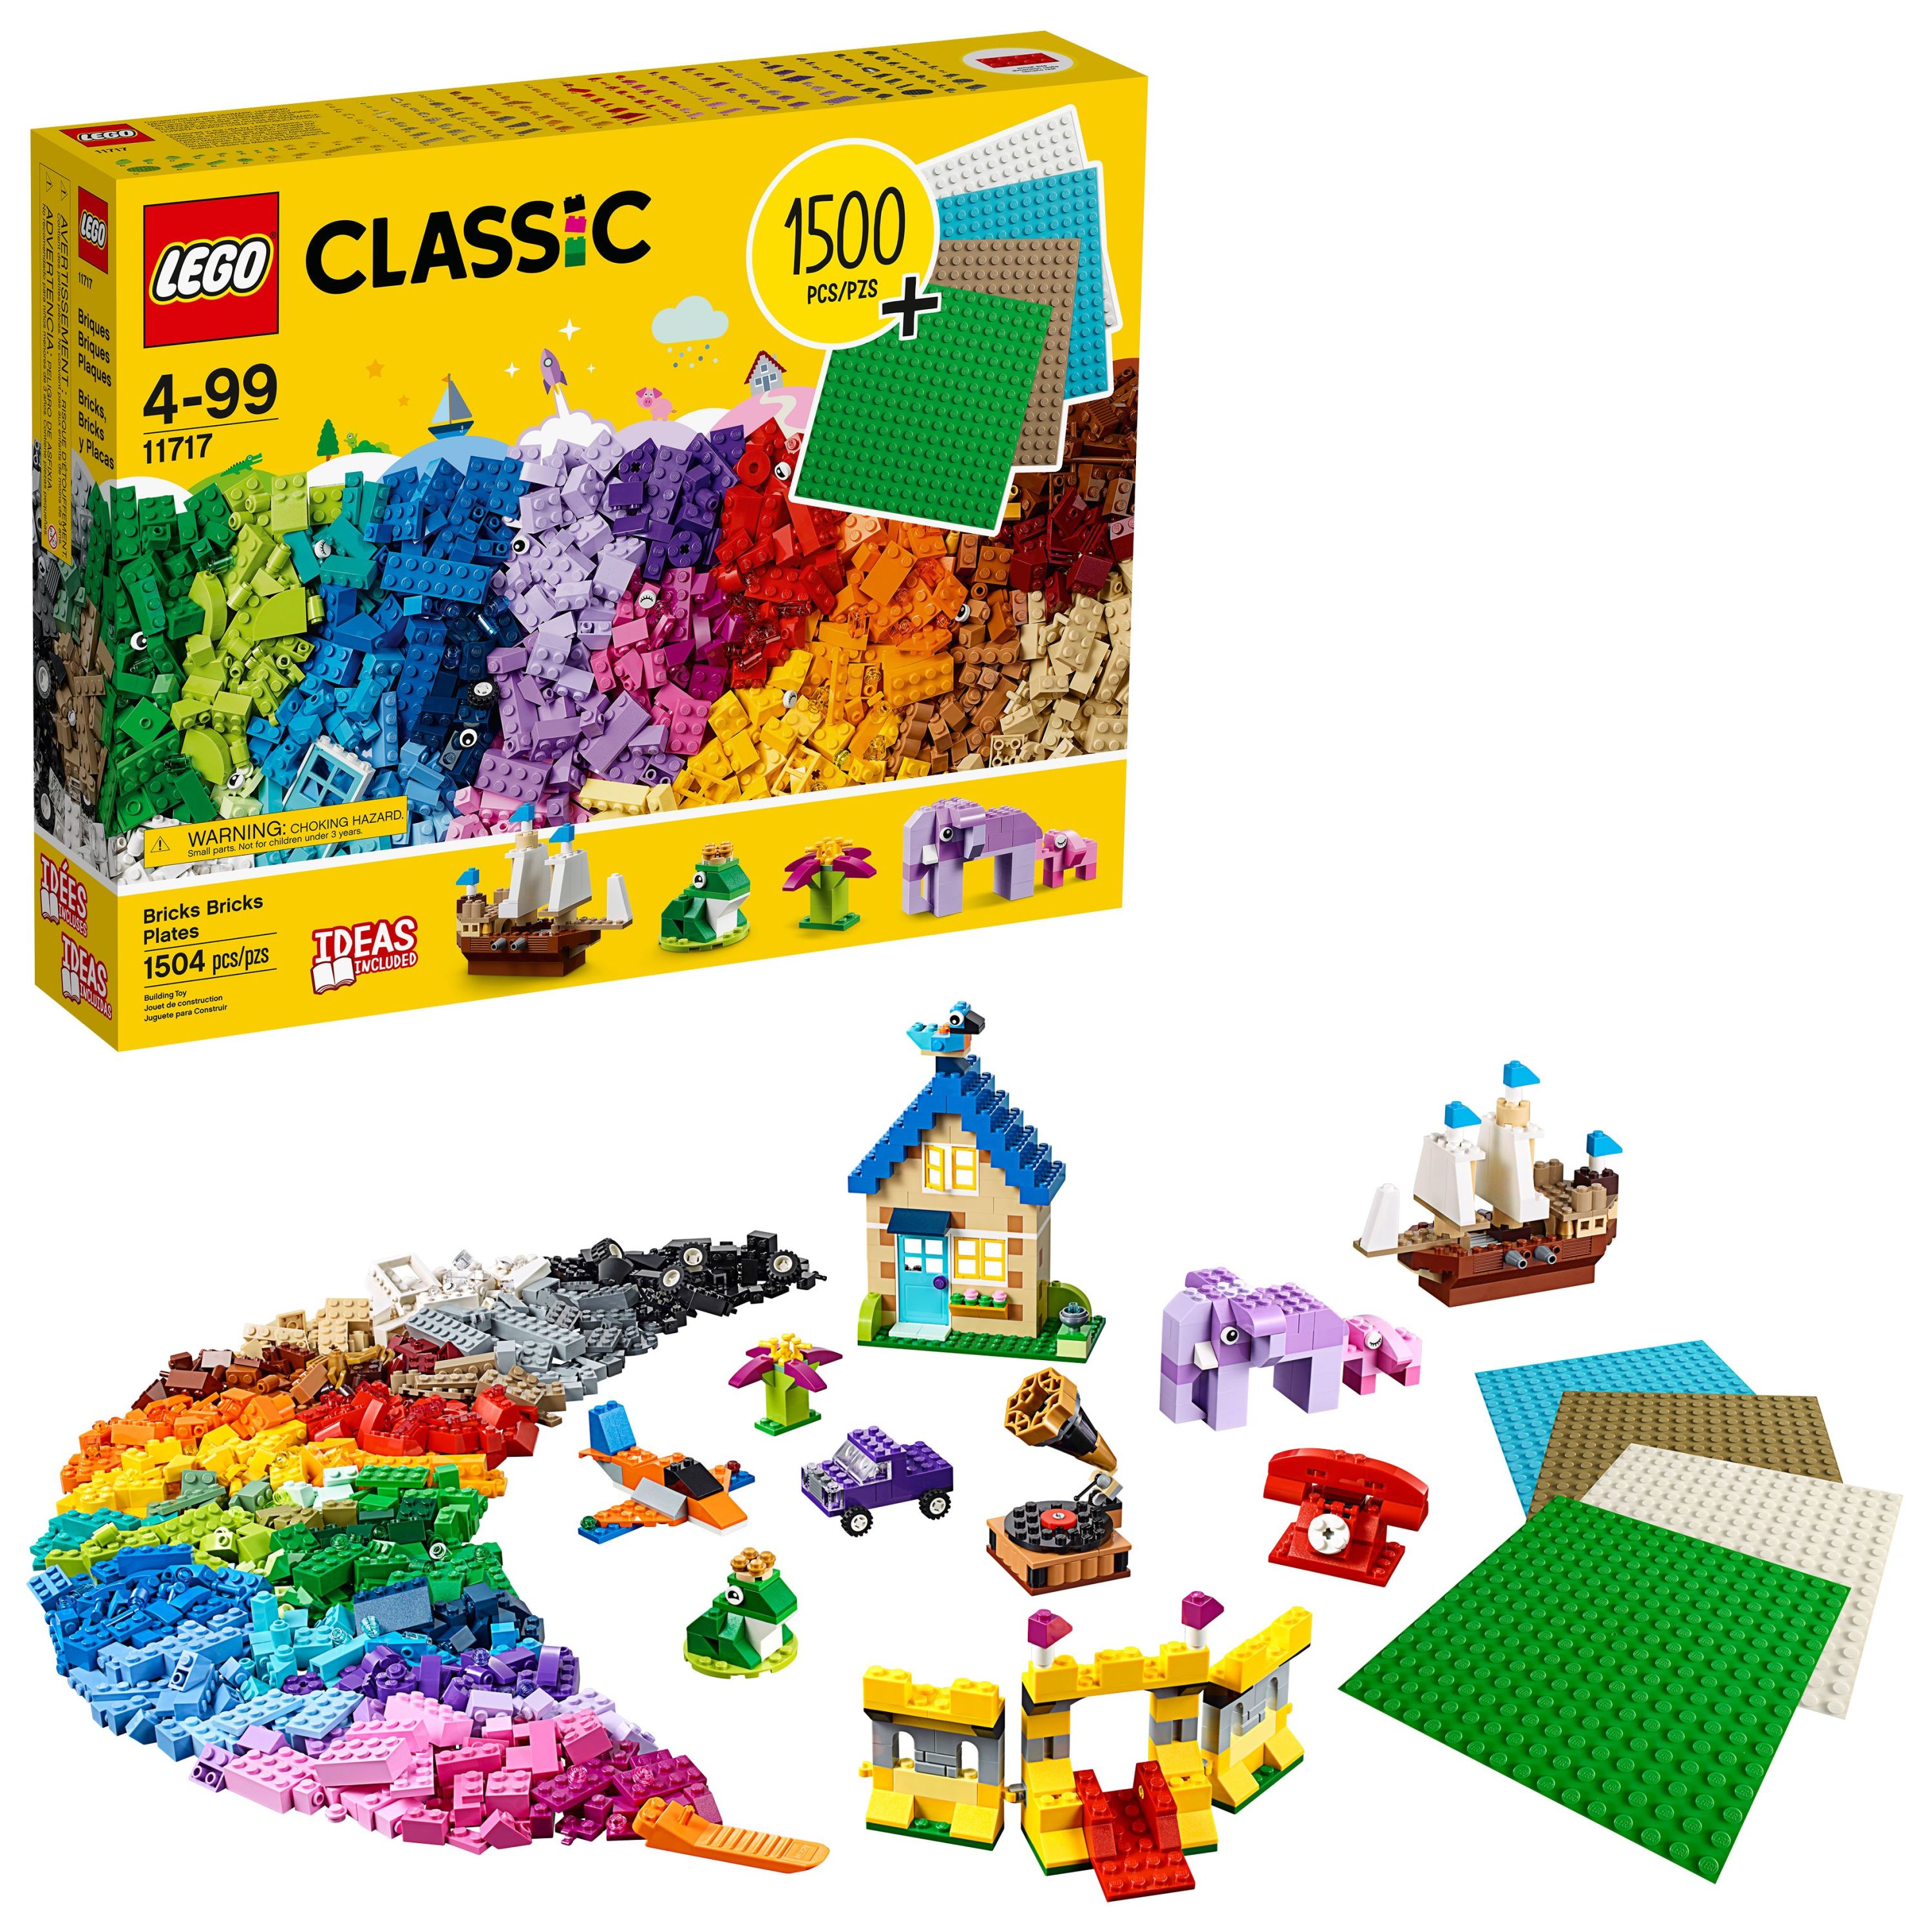 LEGO Classic Bricks Bricks Plates 11717 Building Toy; Great Gift for Kids; Imaginative, Creative, Educational Play Toy (1504 Pieces) - image 1 of 8